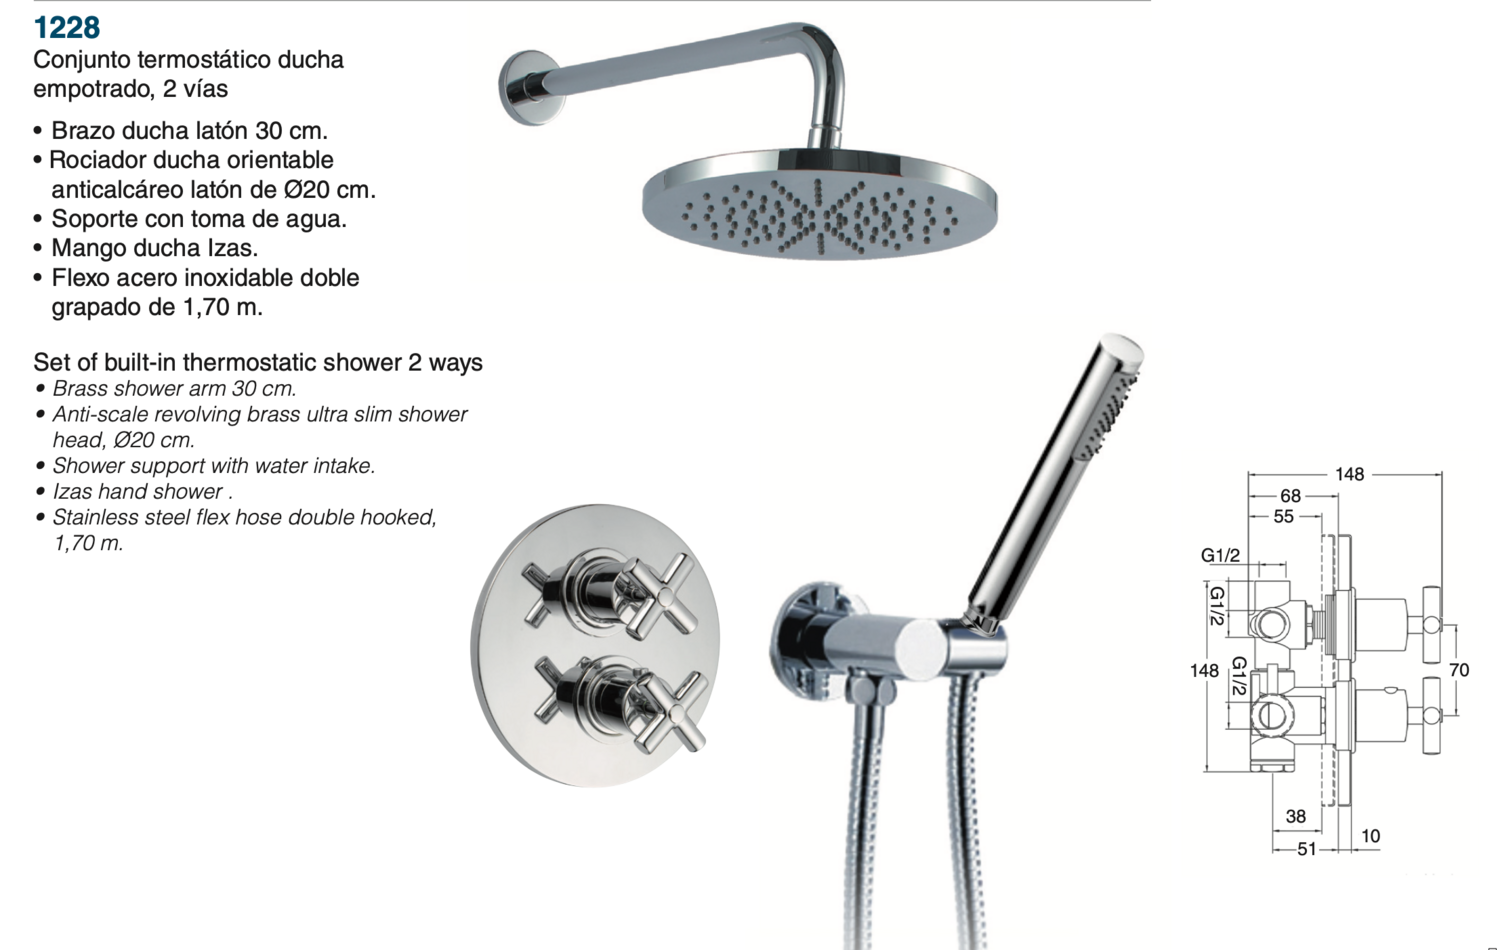 Jalón 2-way built-in shower thermostatic set